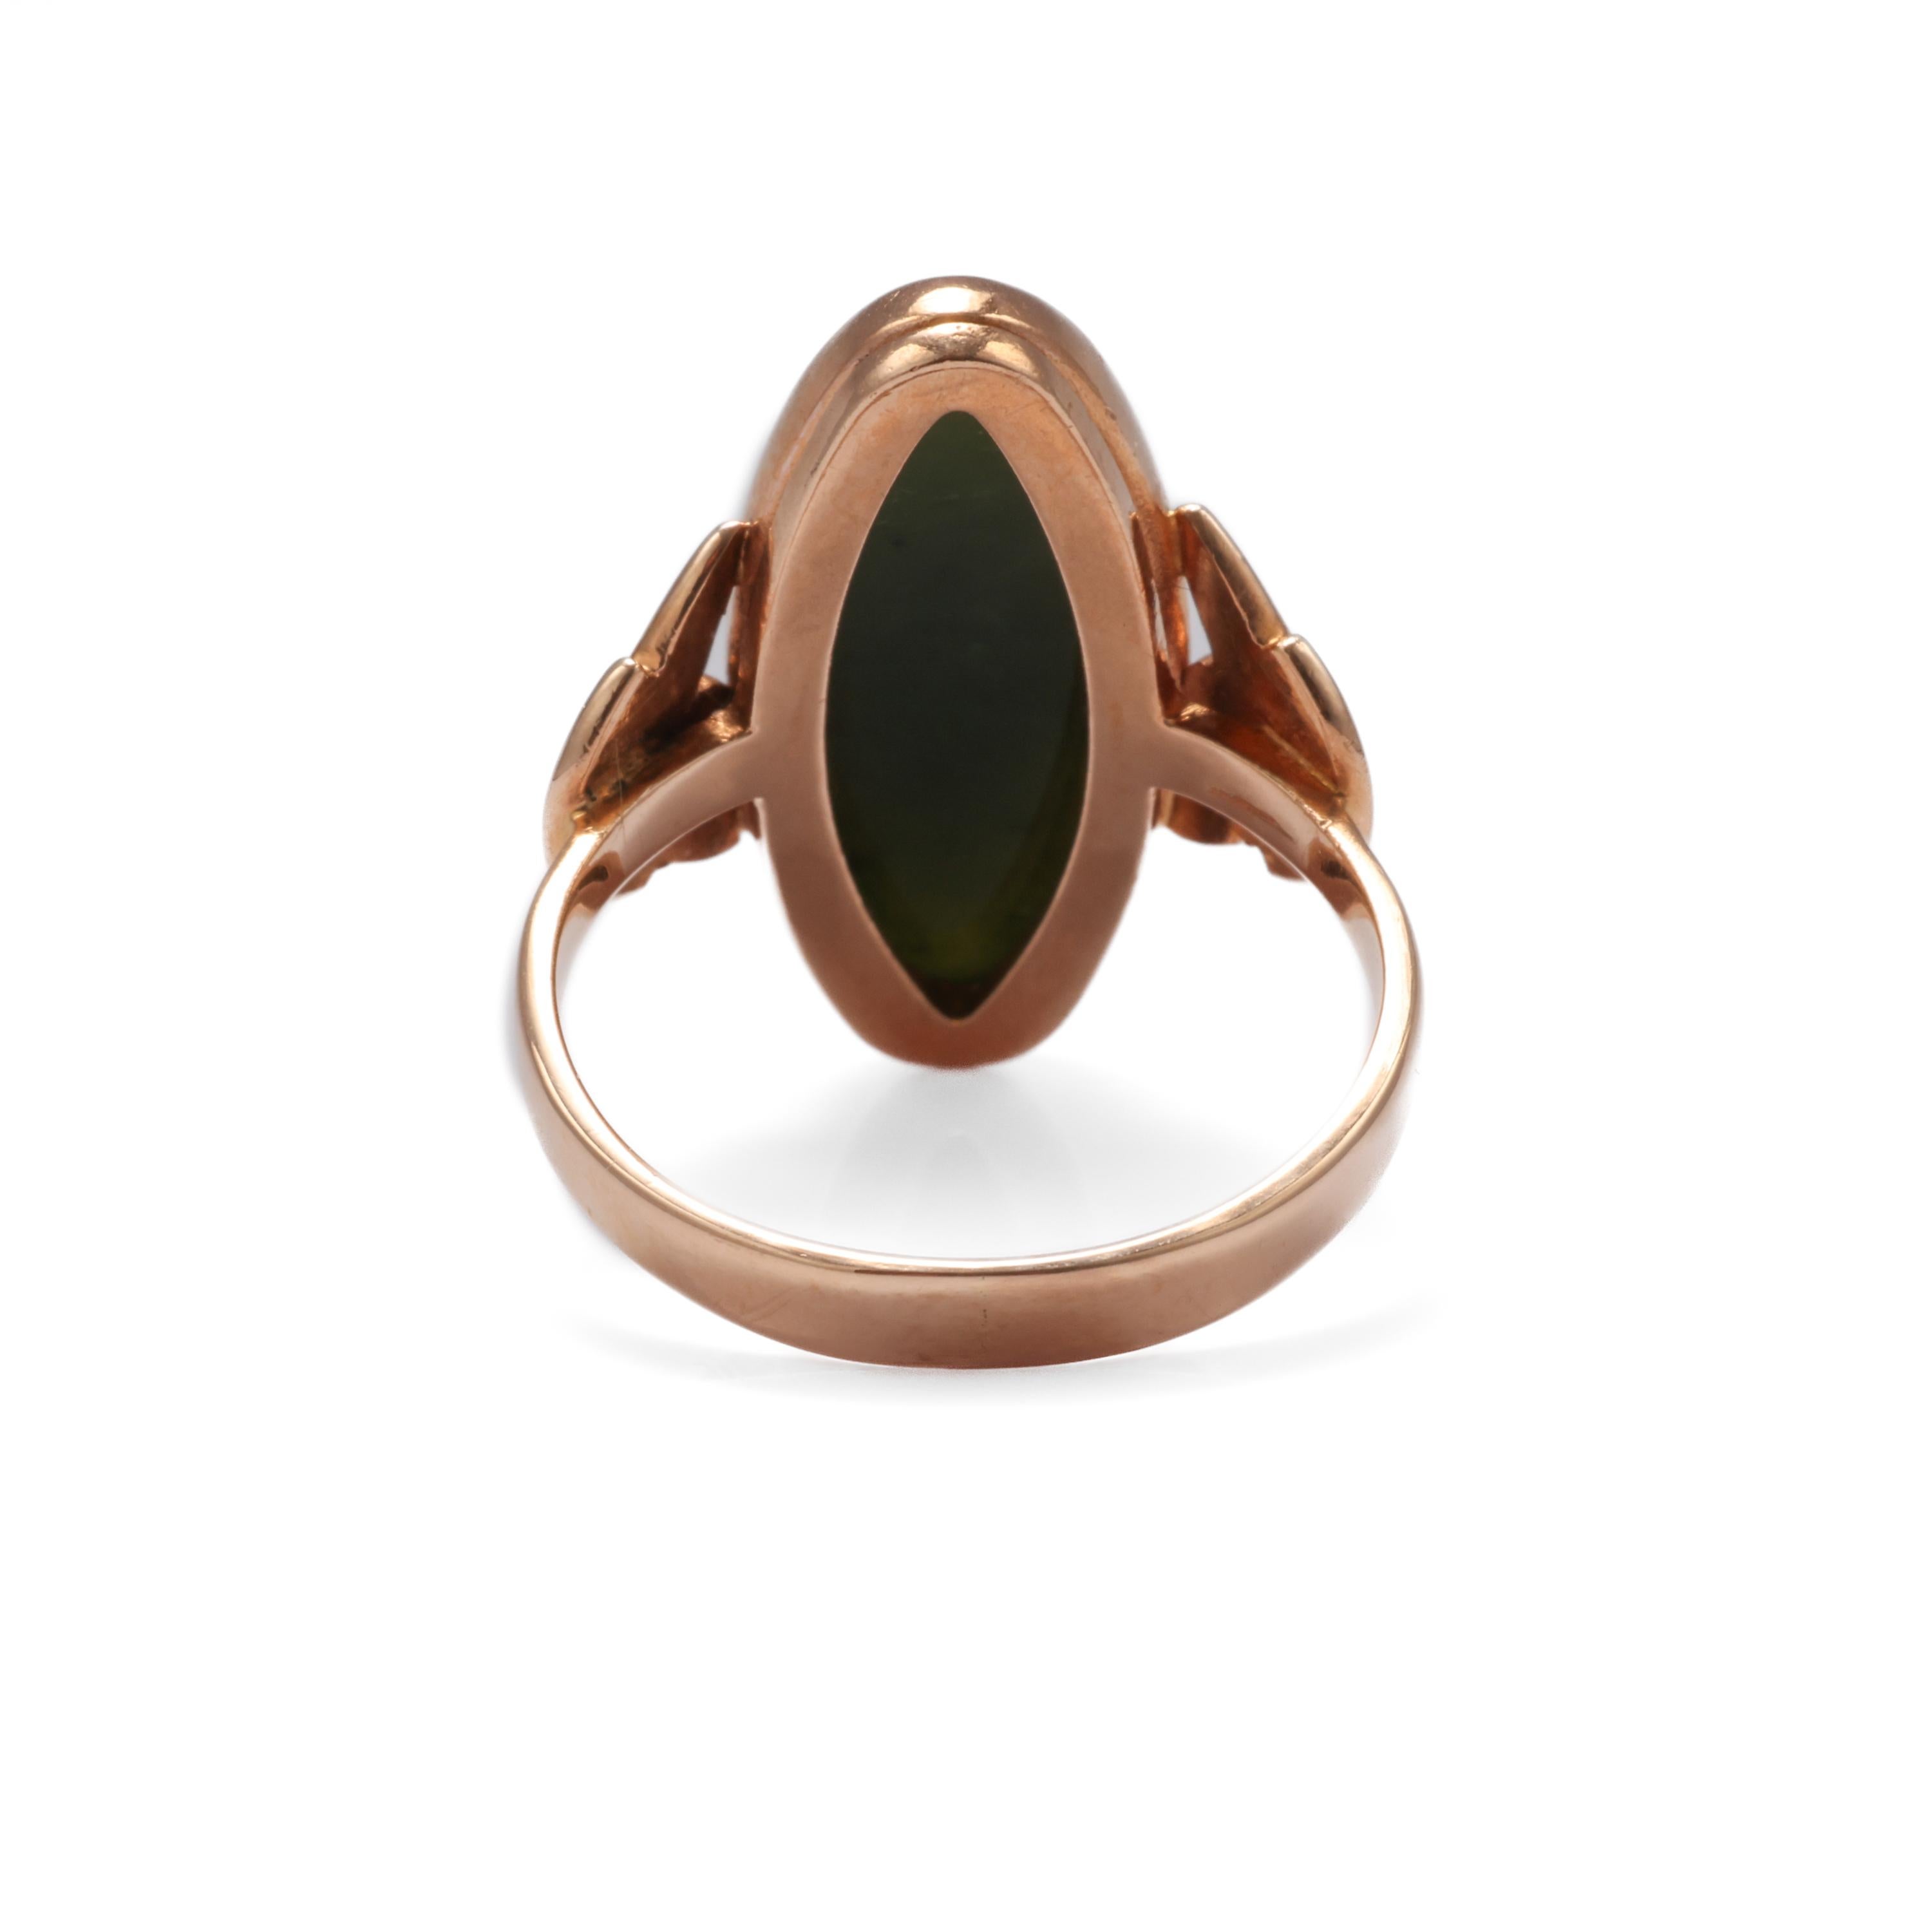 Nephrite Ring in Rose Gold Art Nouveau Style 2